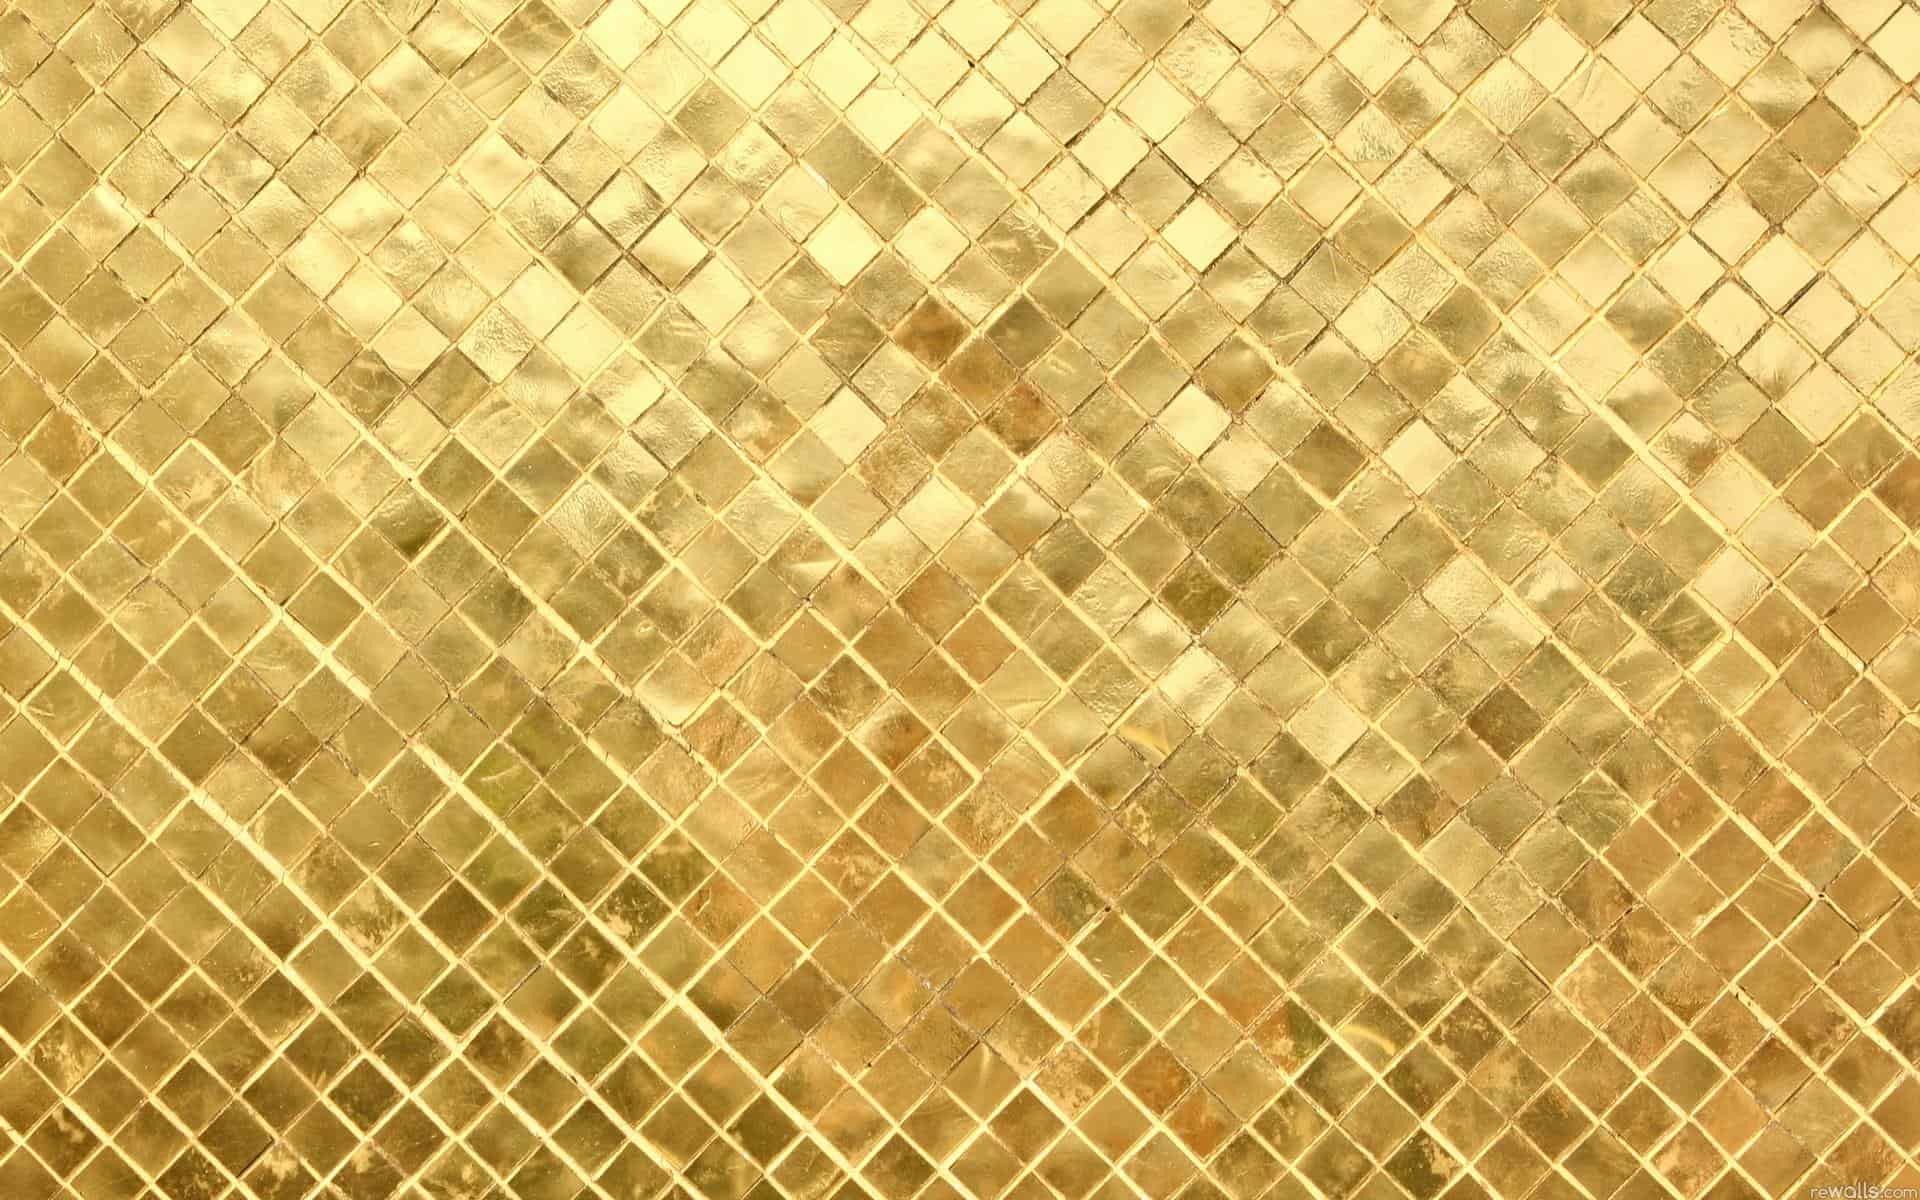 wallpaper hd 1080p free download for mobile,brown,yellow,tile,pattern,beige